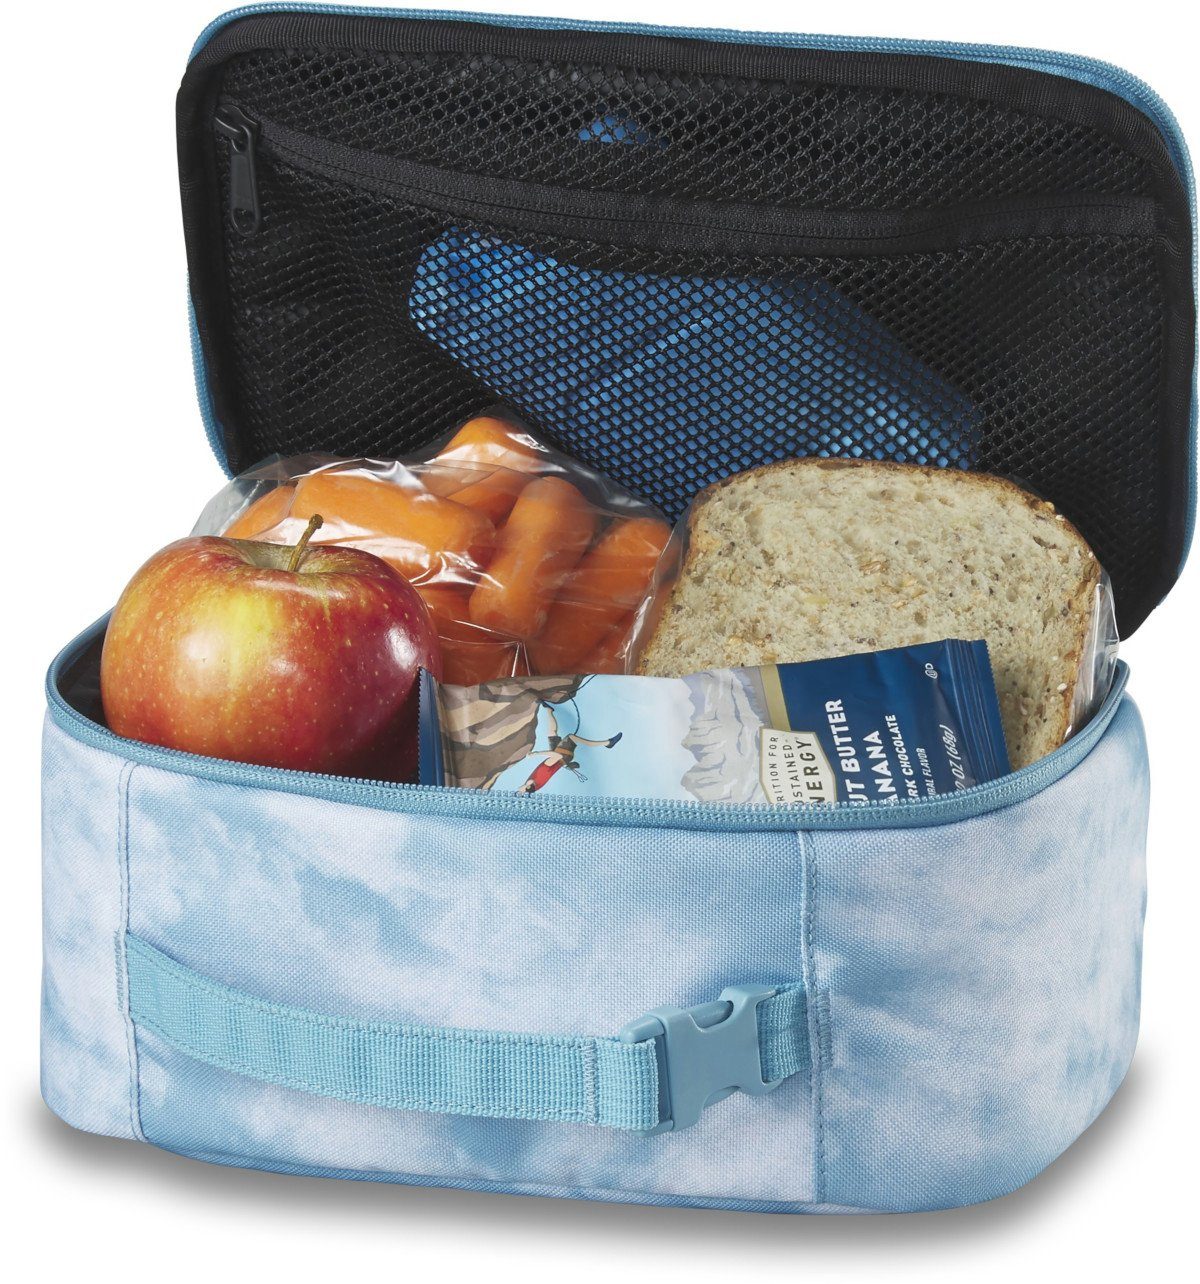 Brotbox 5 Polyester Kids Lunchbox Box Lunch nature Liter, Dakine vibes